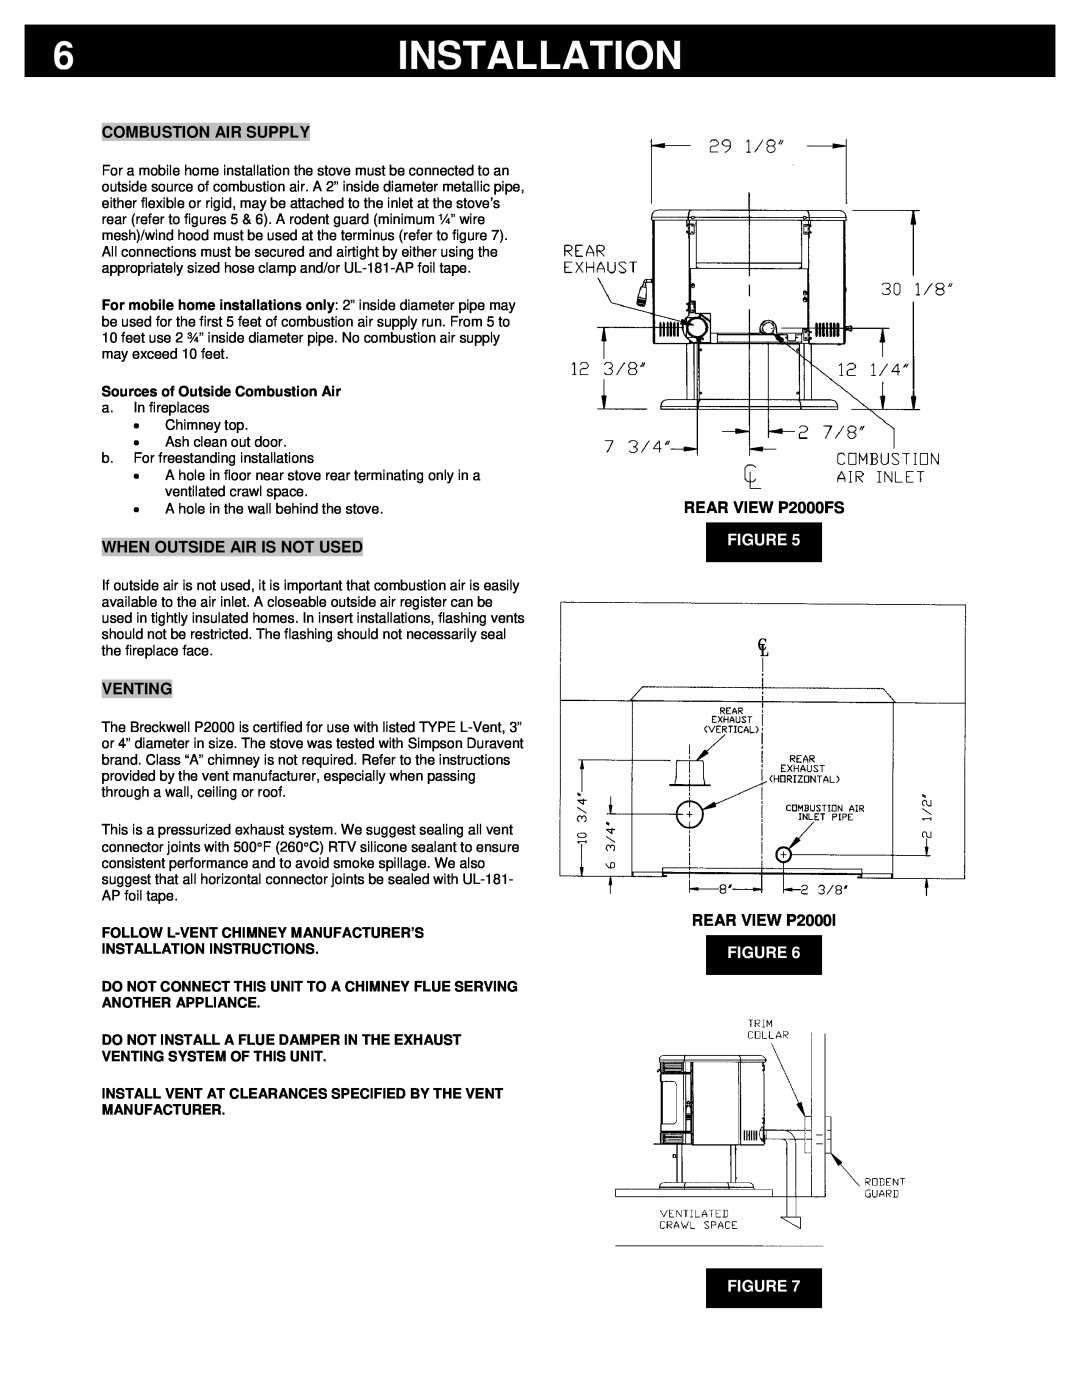 Breckwell Installation, Combustion Air Supply, When Outside Air Is Not Used, Venting, REAR VIEW P2000FS, Figure Figure 